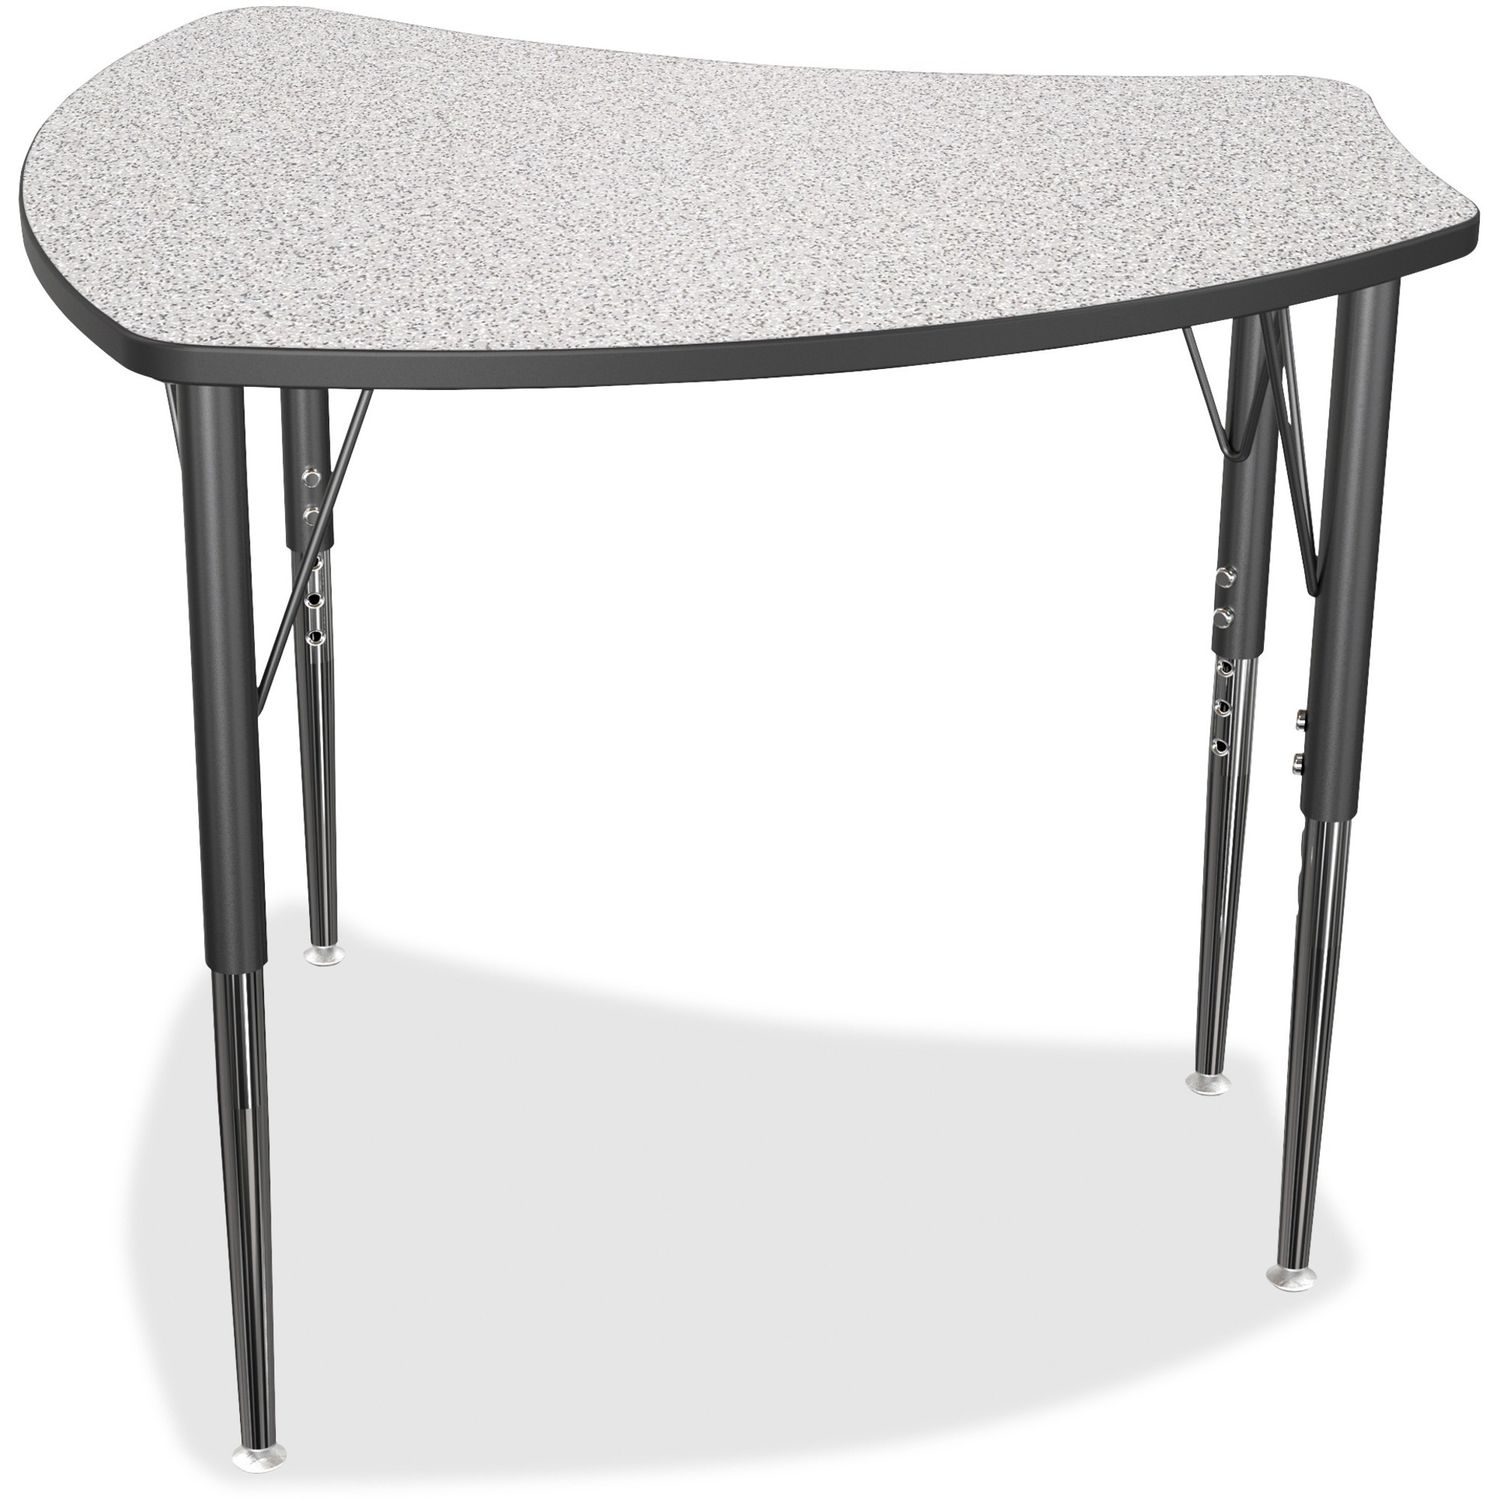 Economy Shapes Desk Curved Top, Four Leg Base, 4 Legs, 28.75" Table Top Width x 27.25" Table Top Depth, Assembly Required, Steel, Rubber